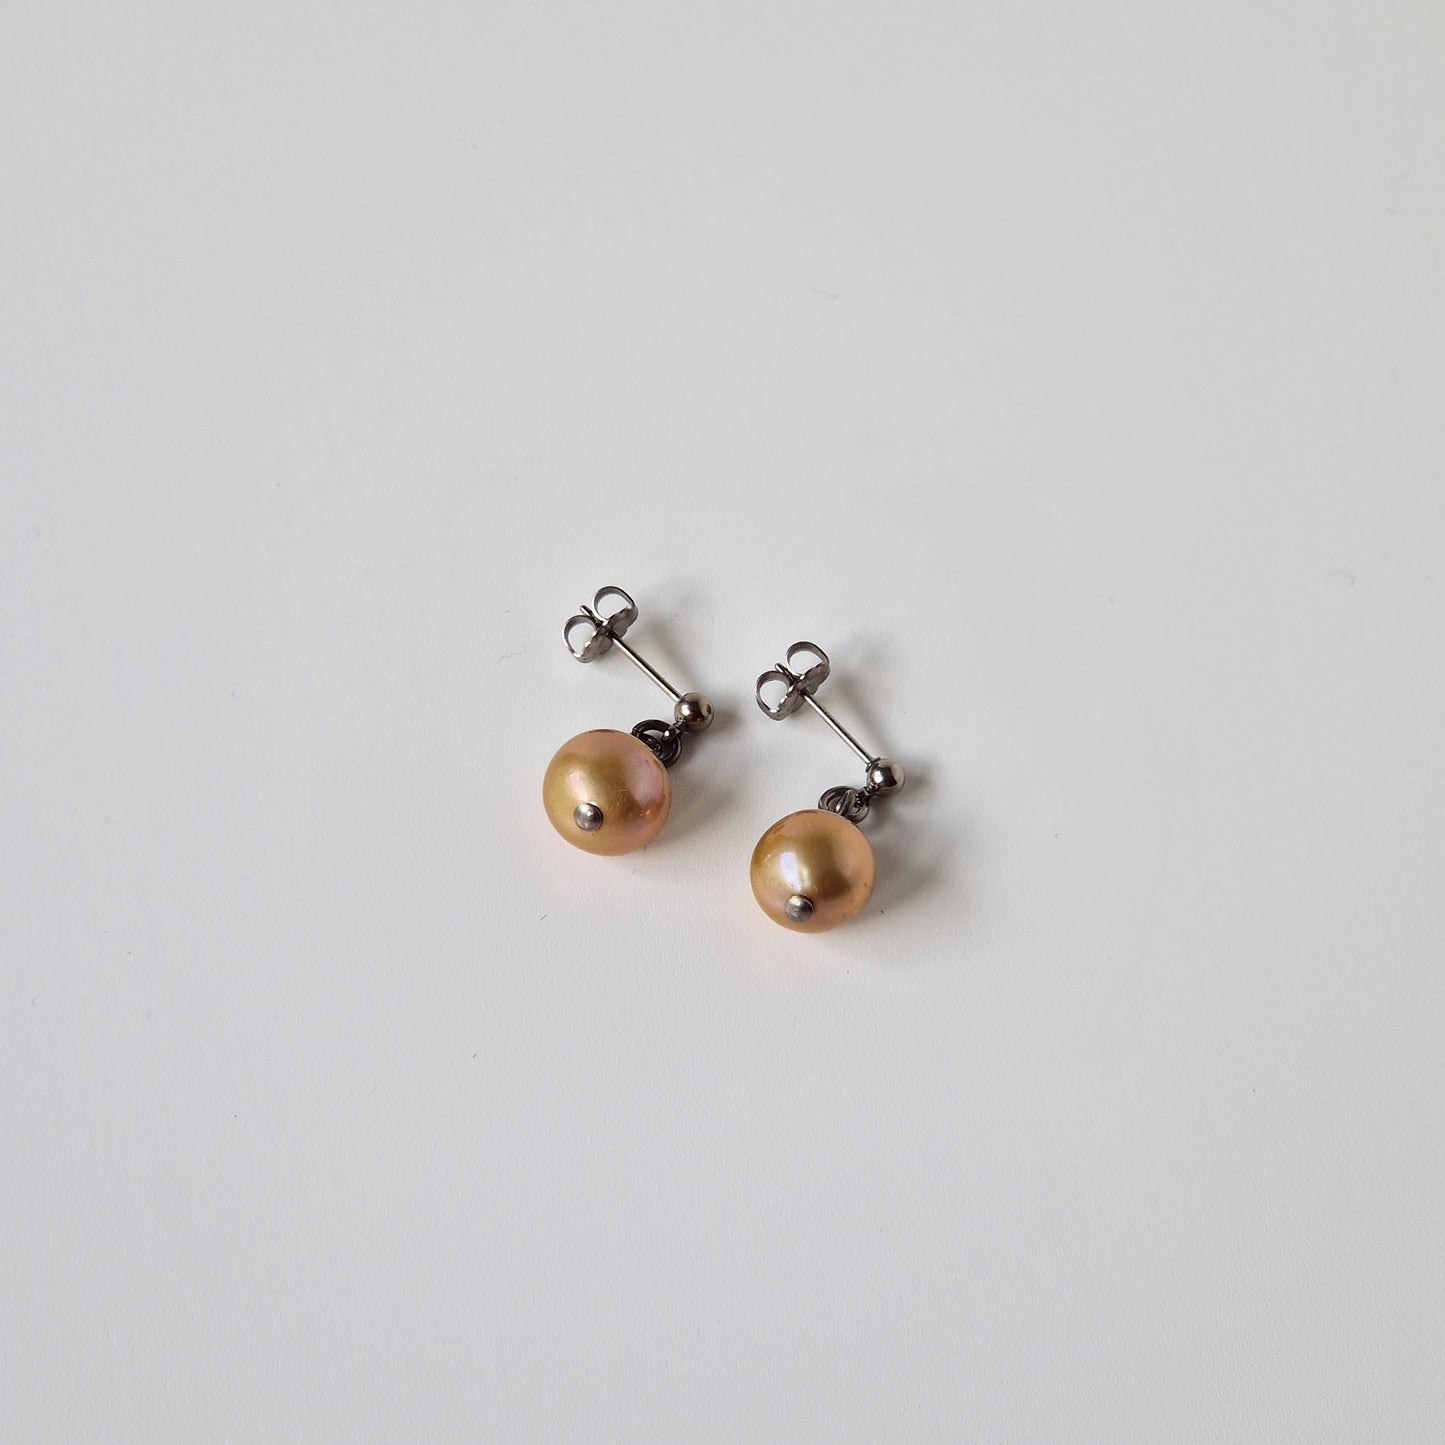 Titanium Post Earrings with Chamapgne Pearl Dangle